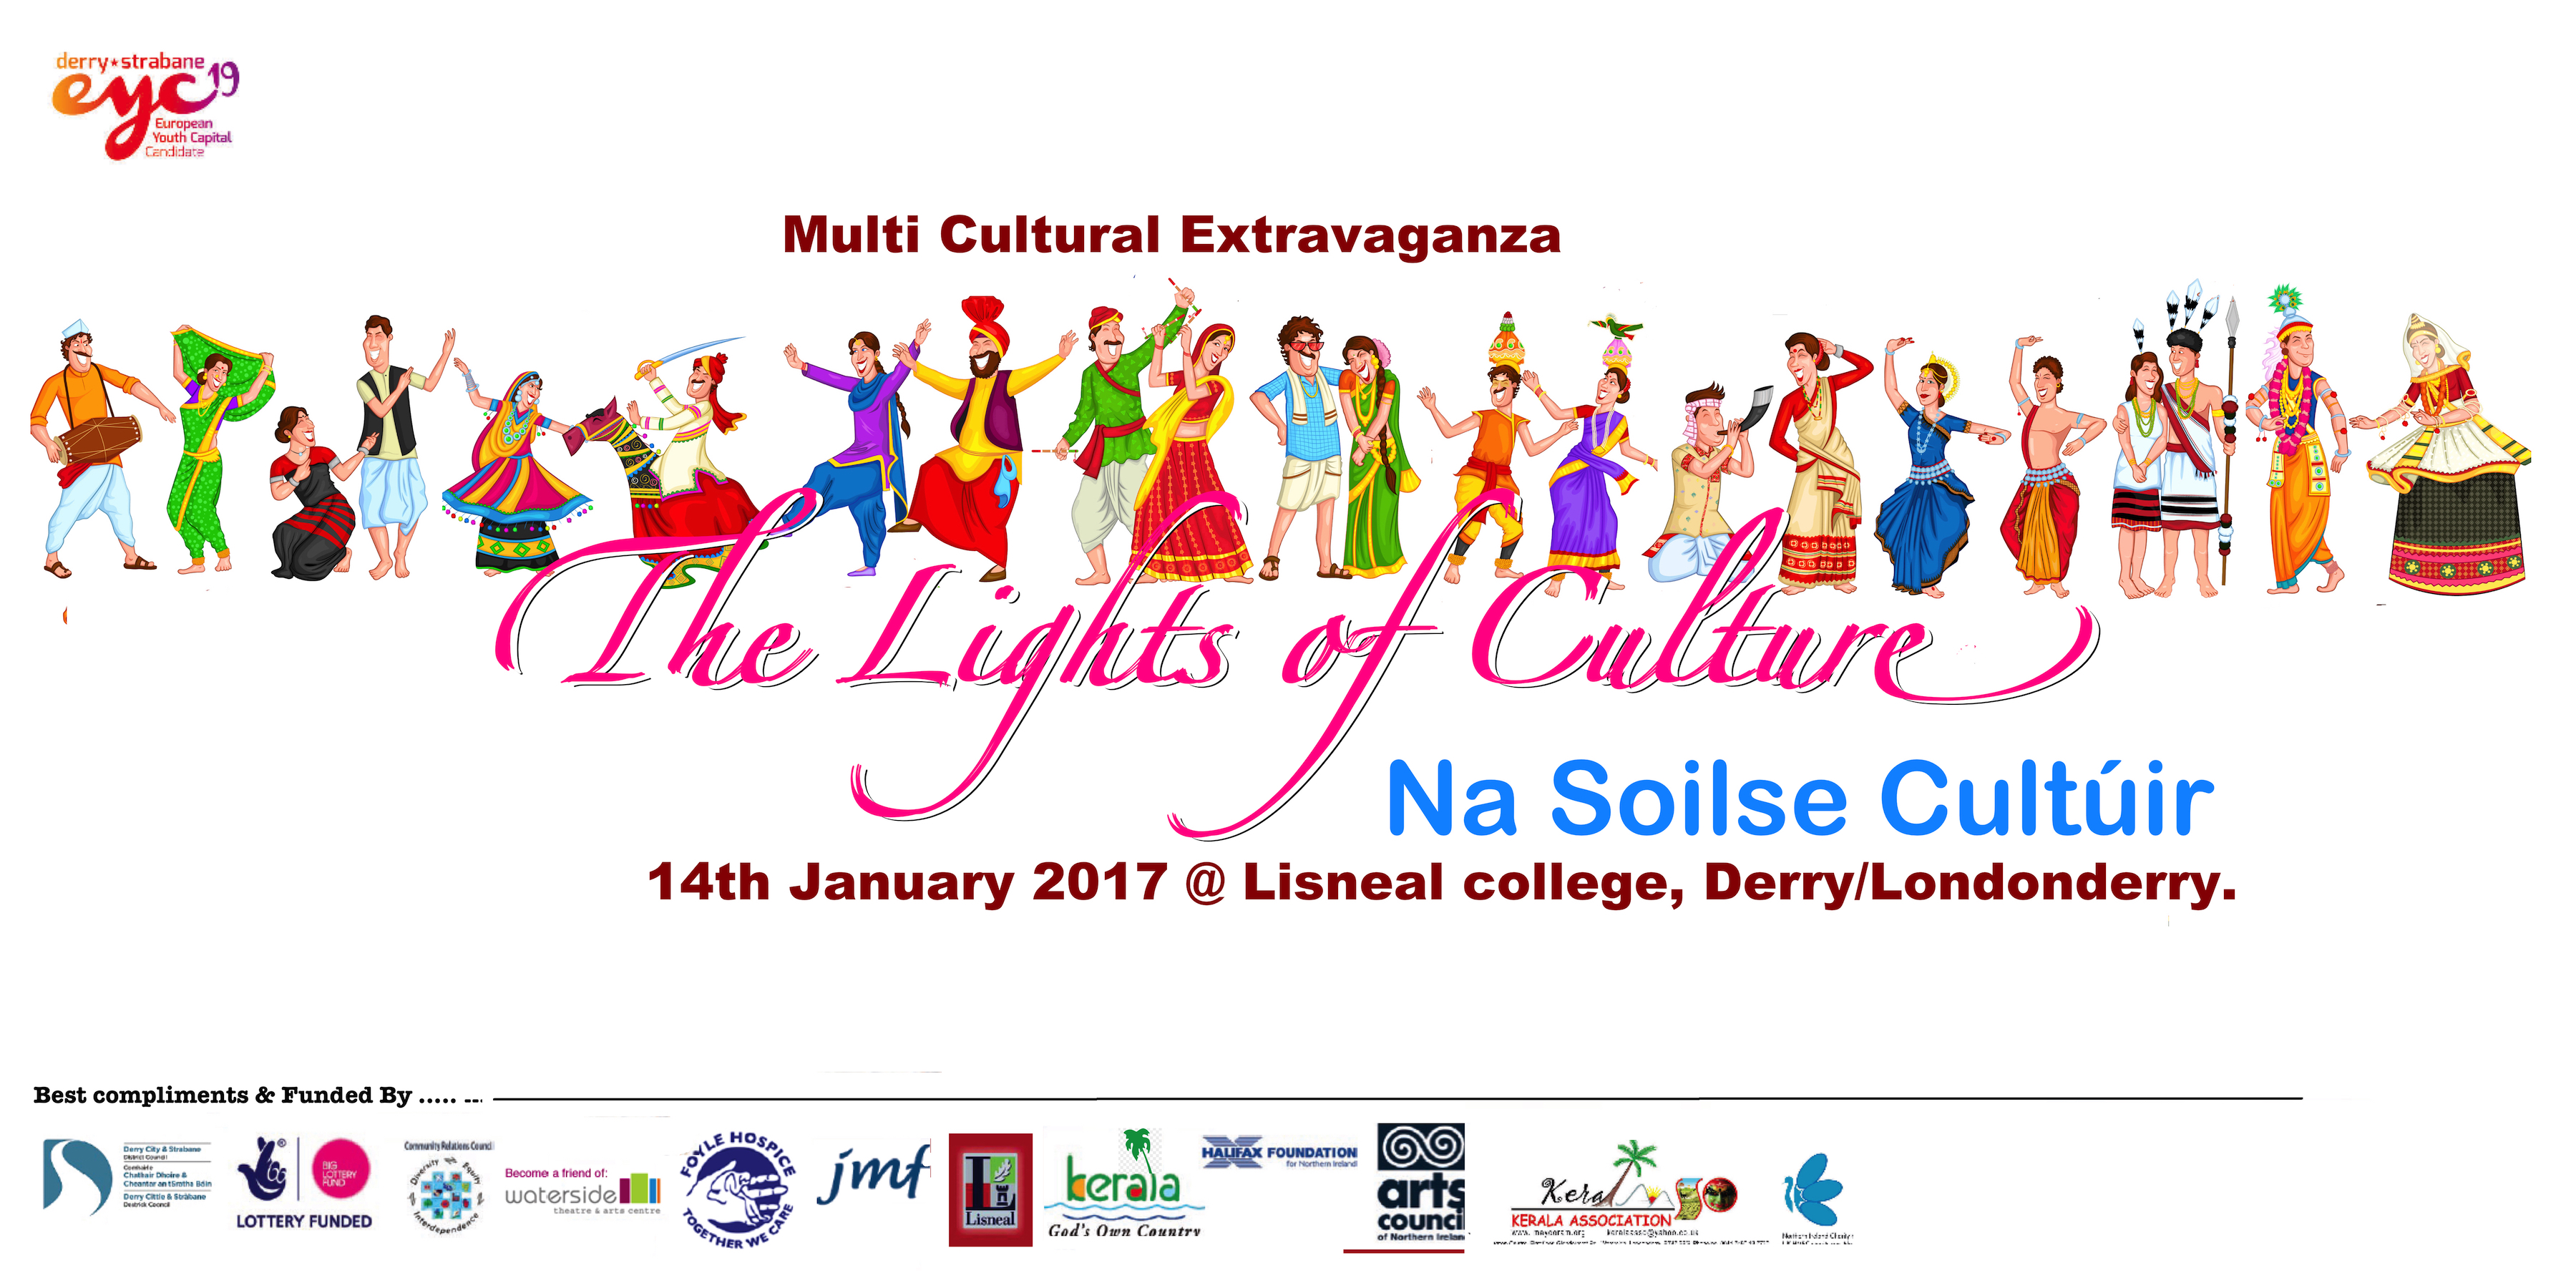 The lights of culture 17 derry